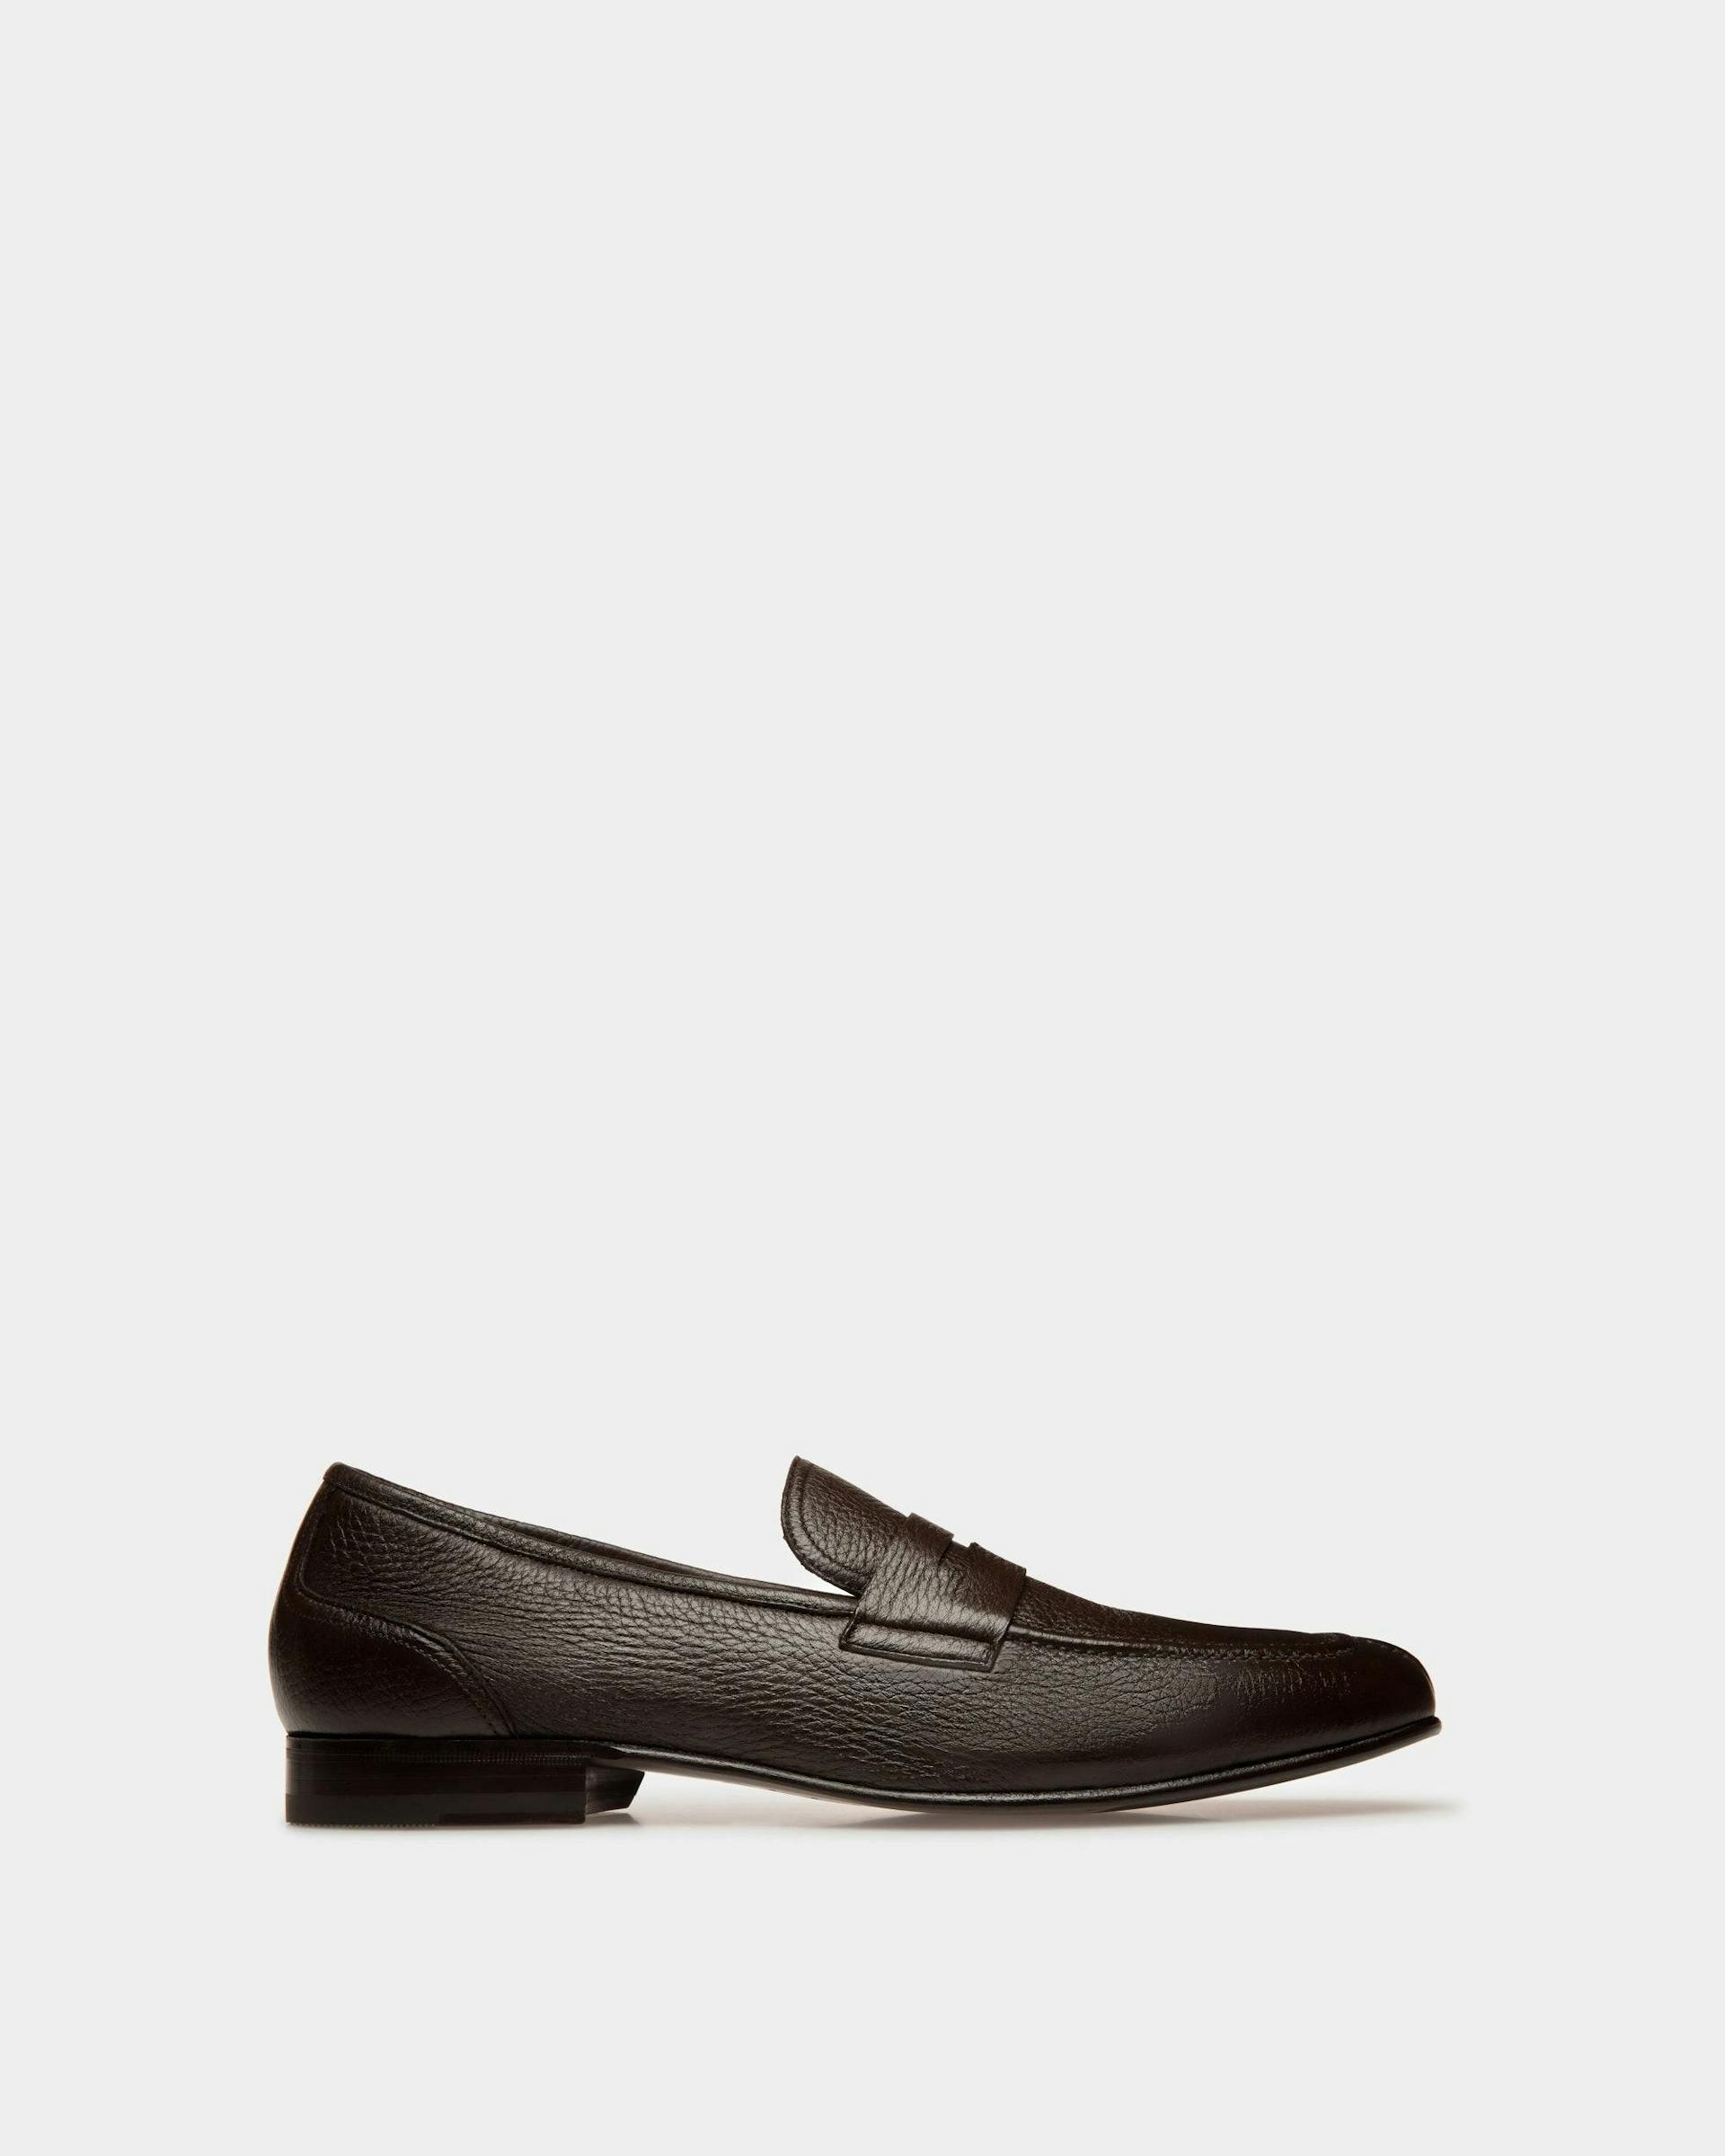 Suisse Loafers - Bally